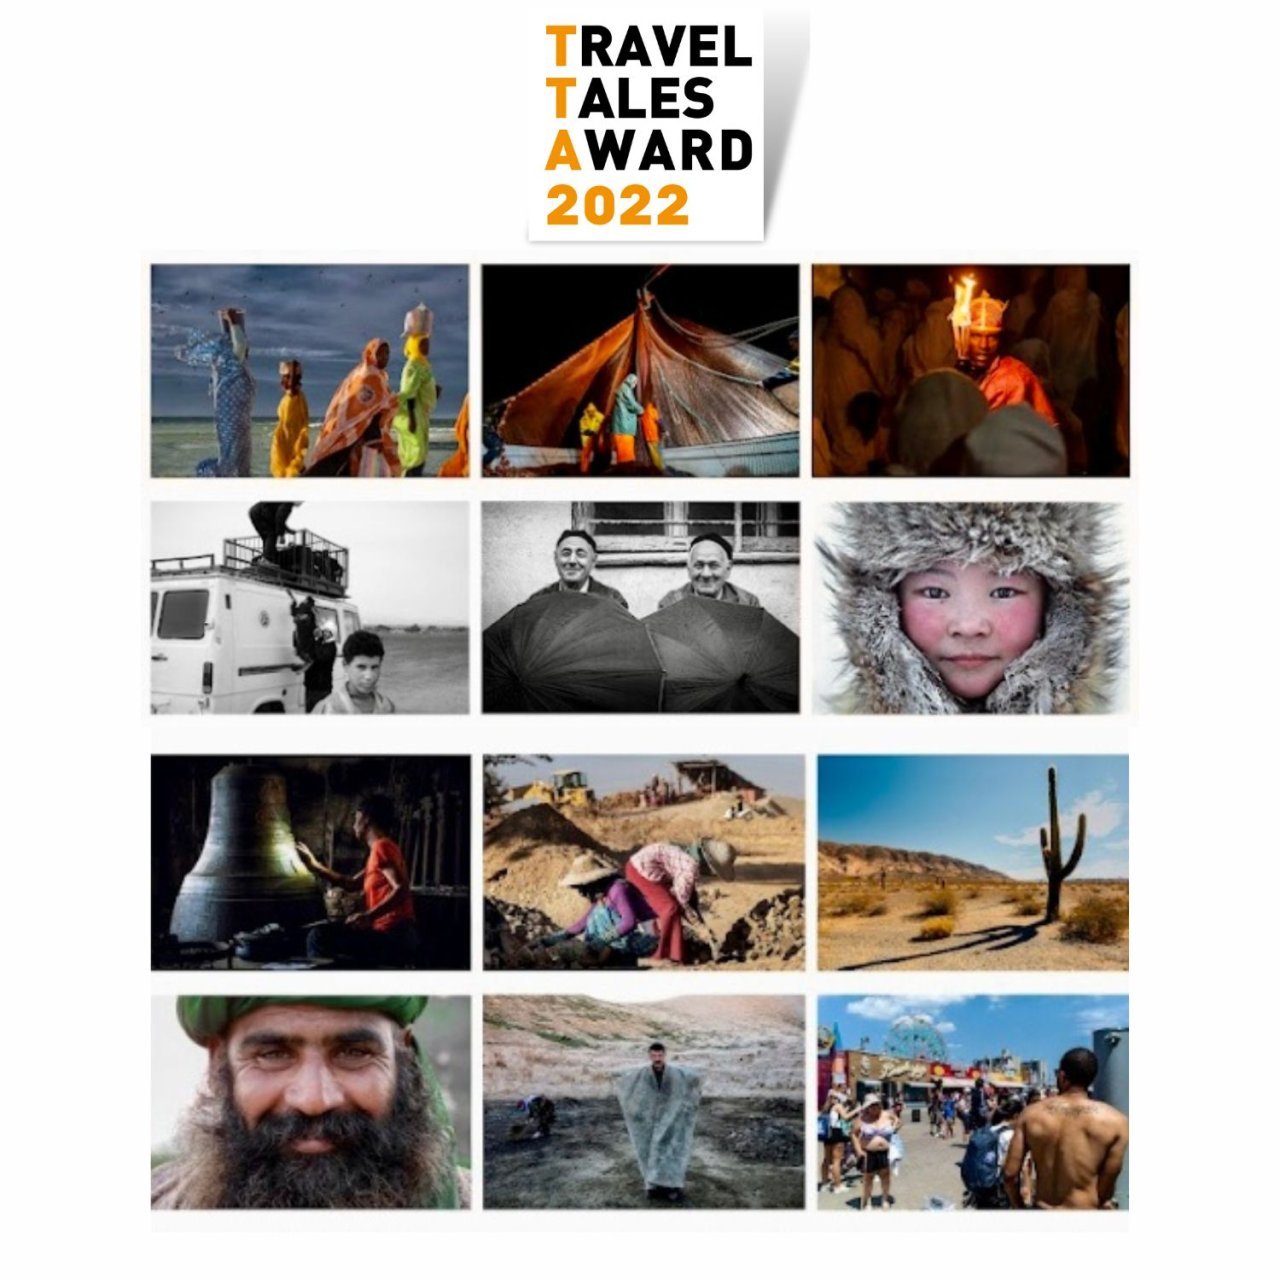 Collective exhibition of 11 photographers selected for the Travel Tales Award 2022